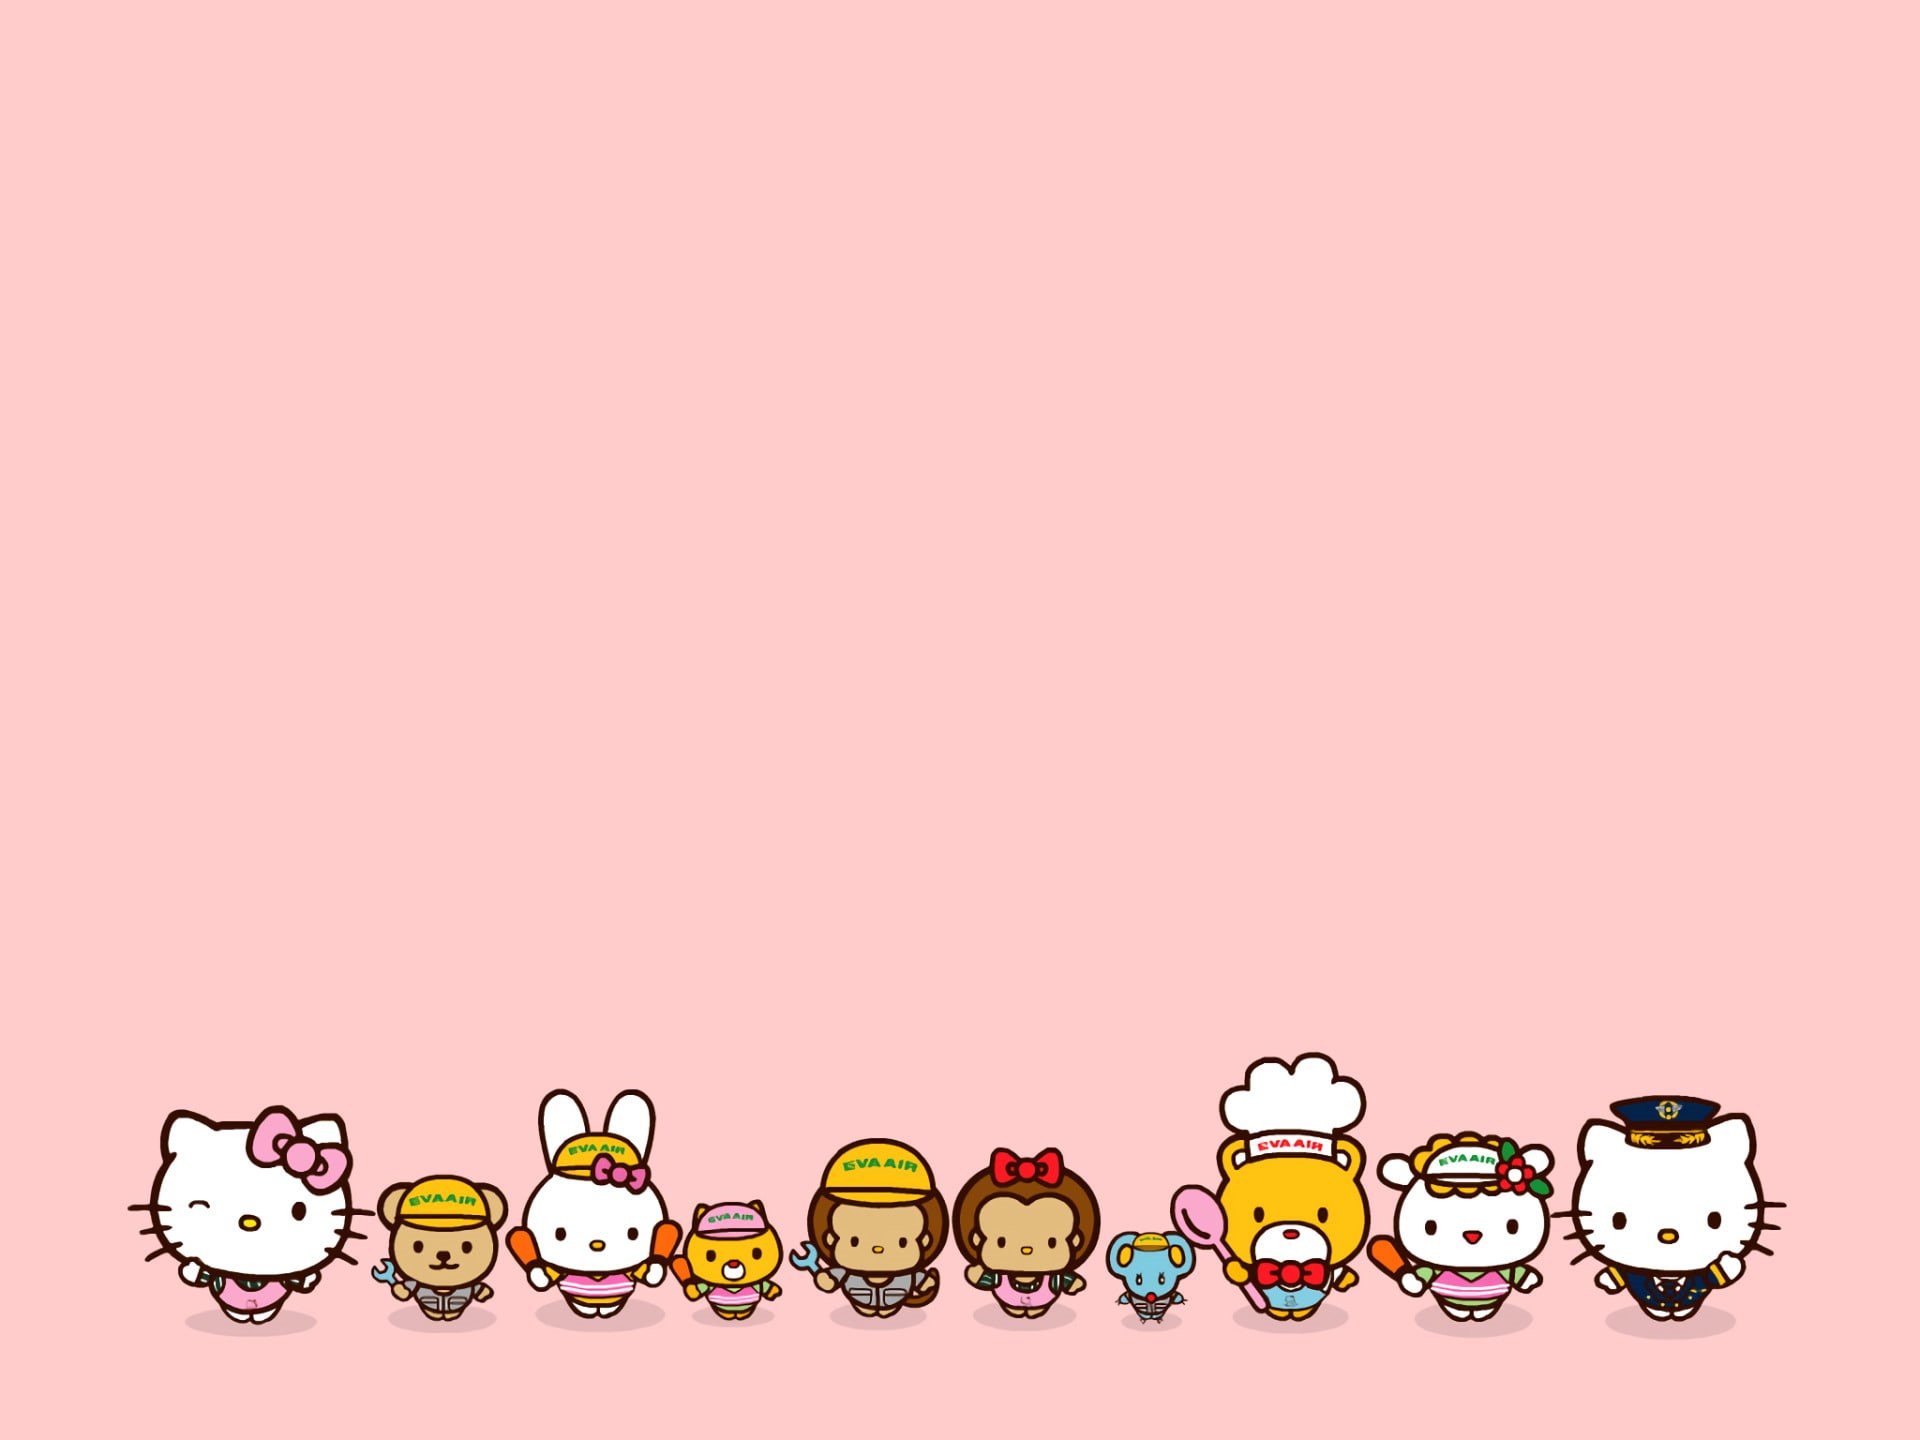 Wallpaper / child, colored background, copy space, art, happiness, Hello Kitty, symbol, computer Graphic, people, 1080P, choice, cheerful, emotion, variation, vector free download